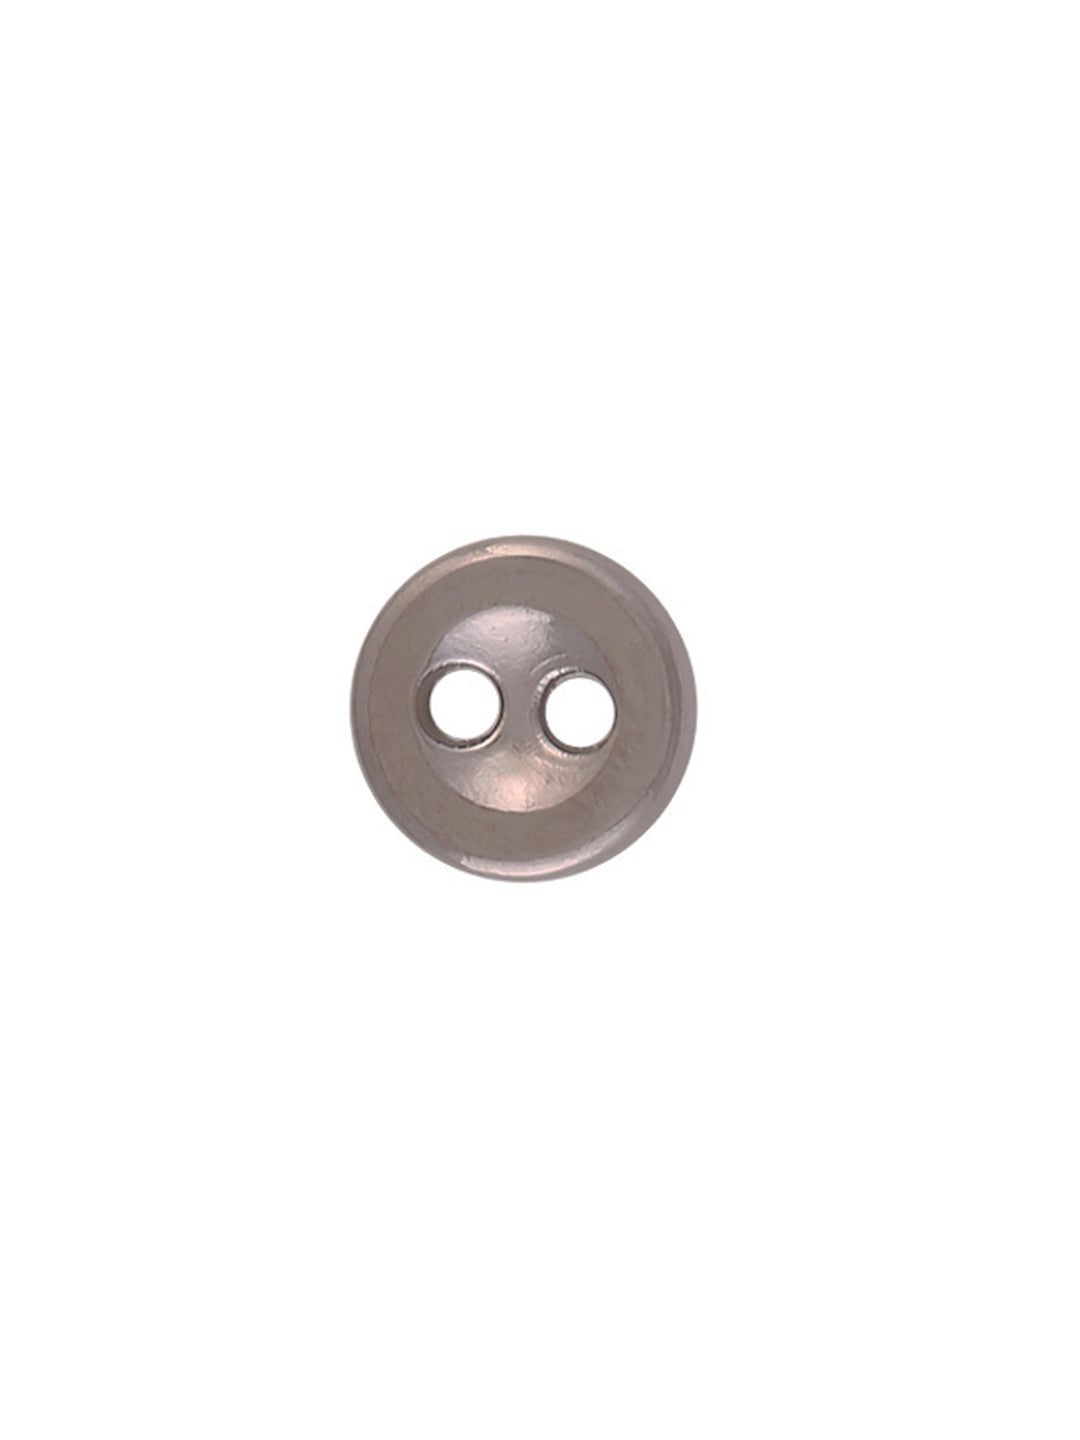 Hollow Round Shape Small Size Rounded Rim Metal Button